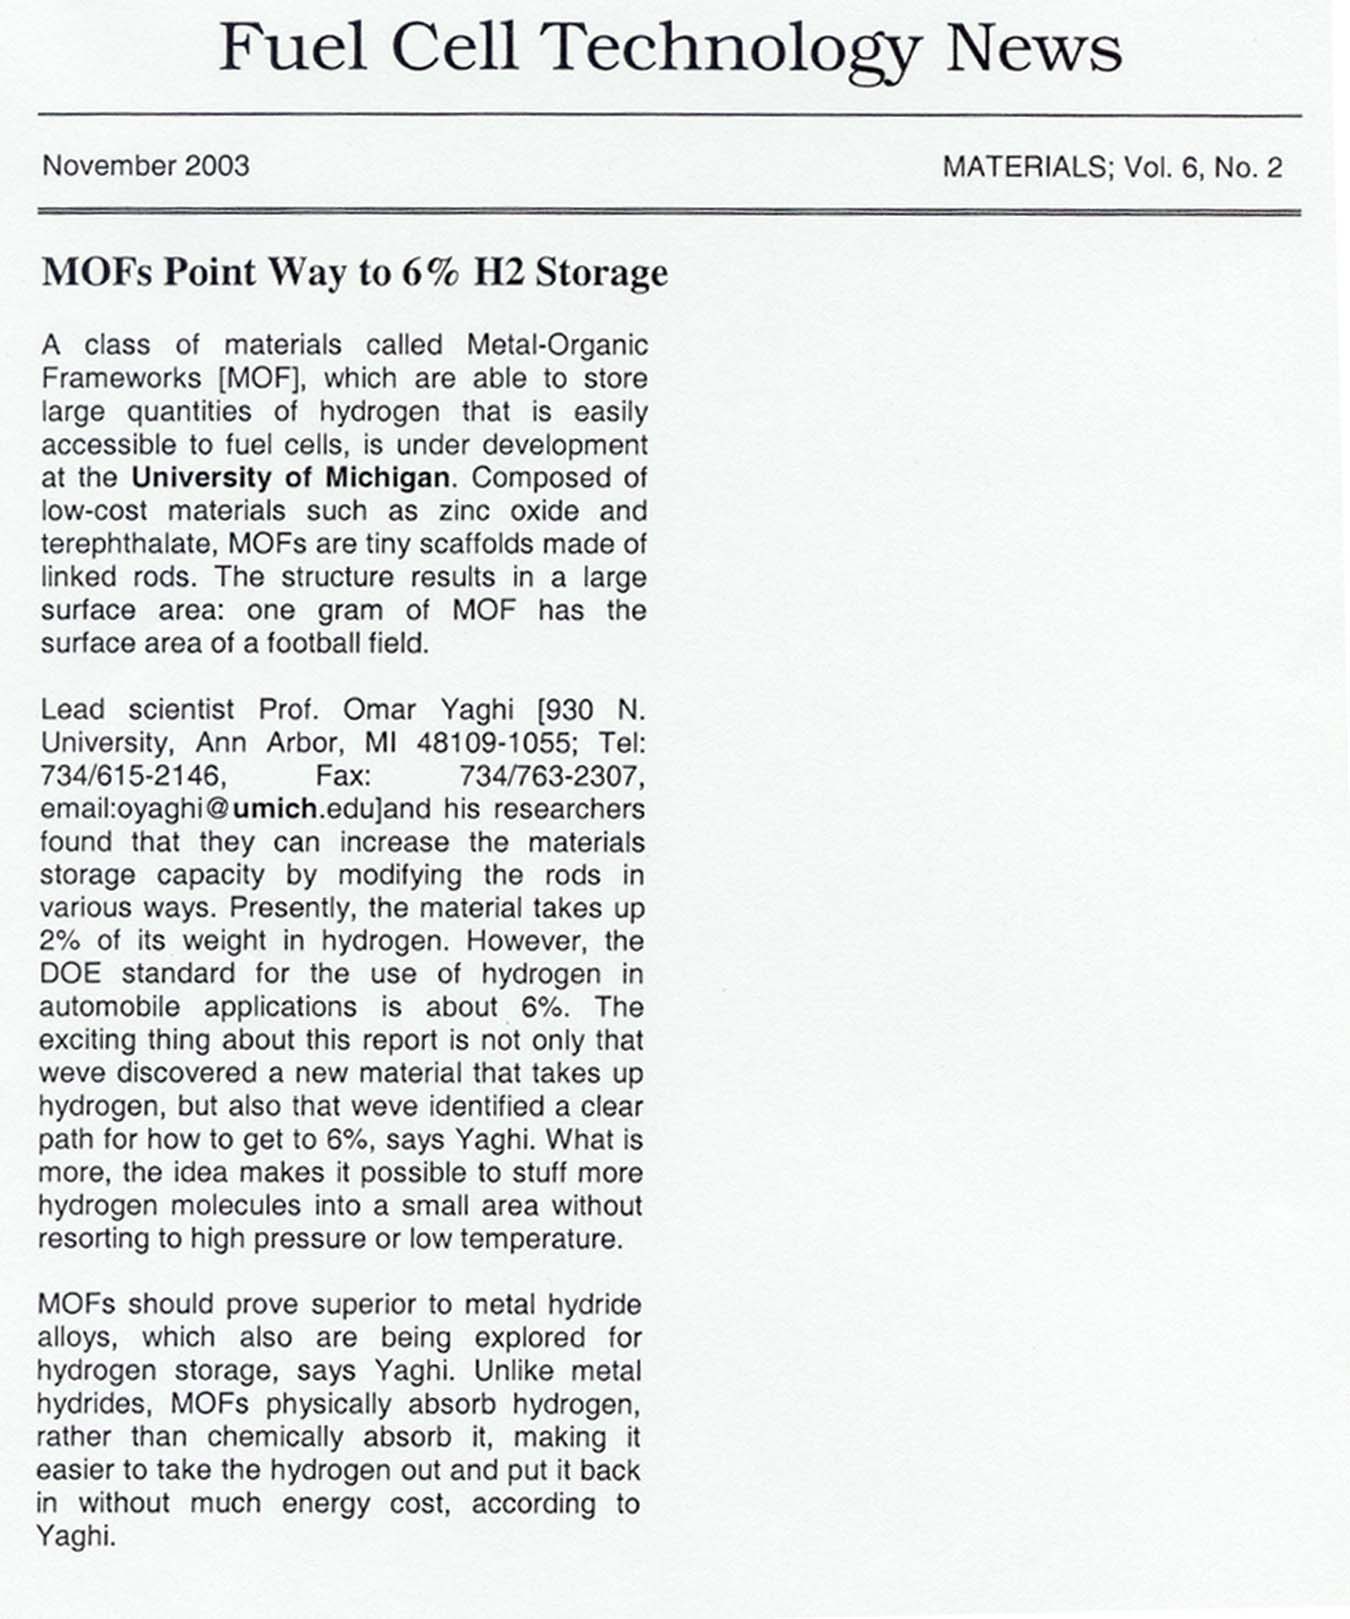 The World Market for Metal Containers for Storage and Transport: A 2003 Global Trade Perspective (Jun 2, 2003)